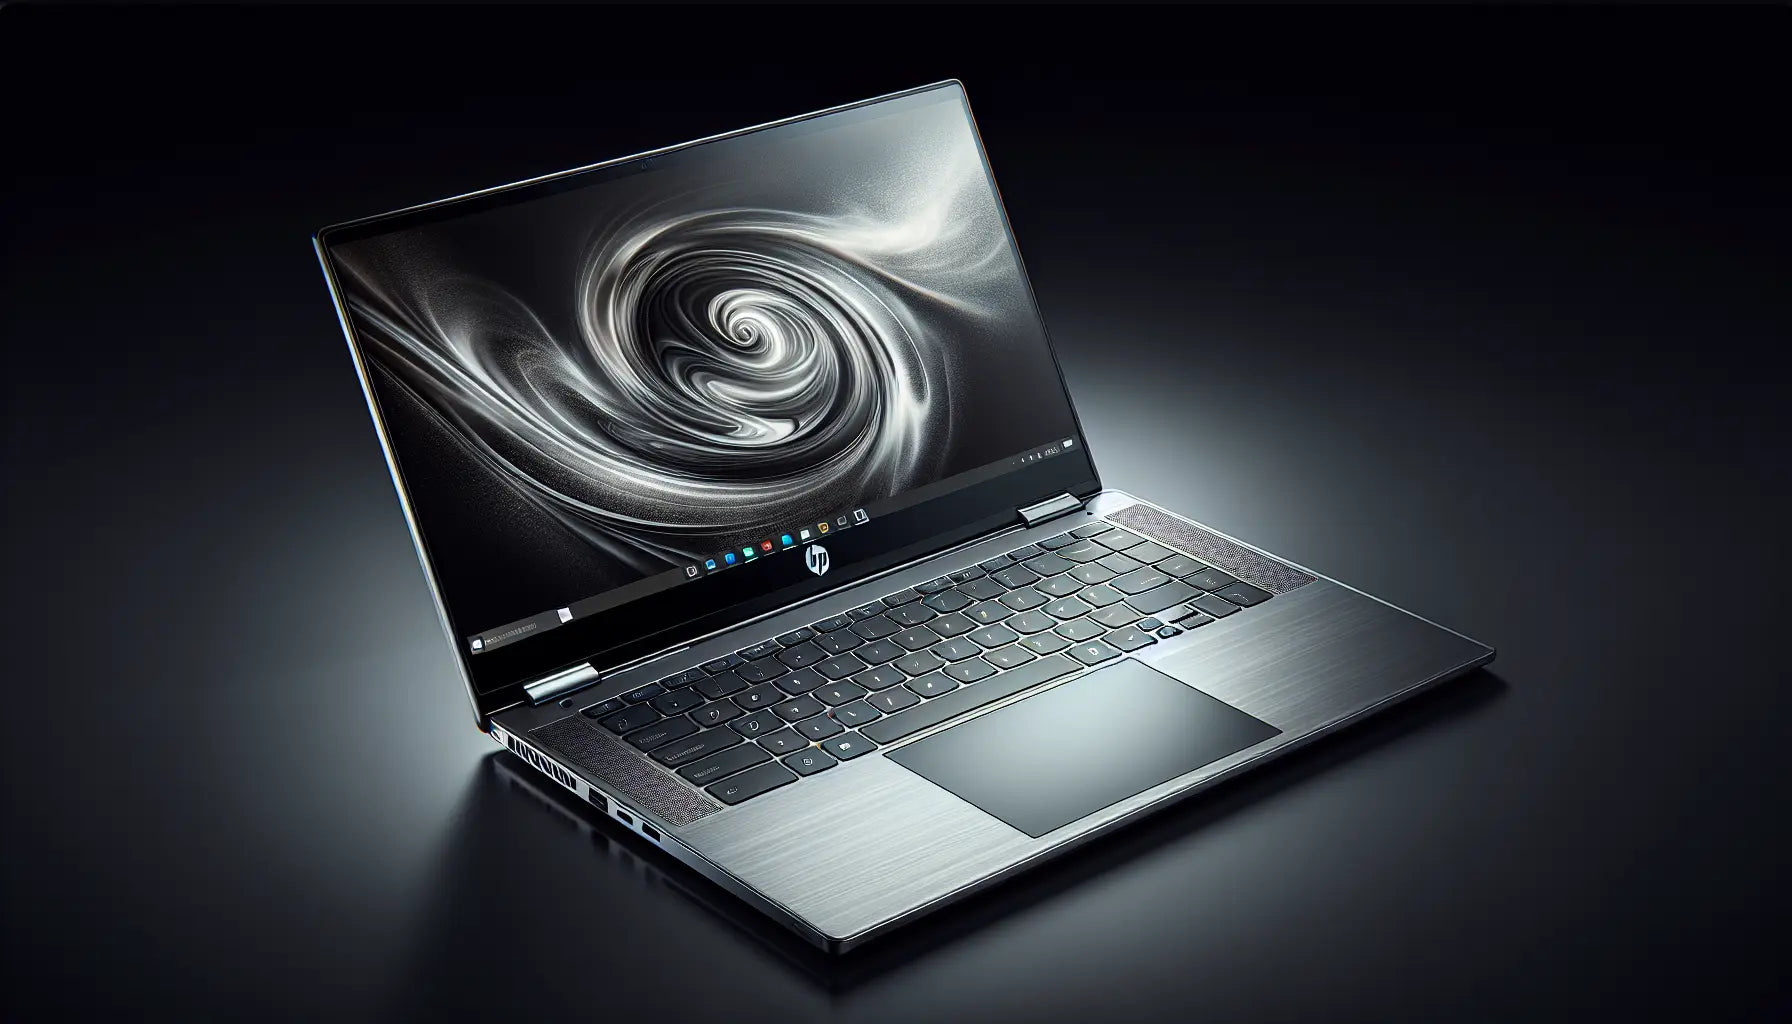 The HP 840 G5 (Touch Screen) I5, 8th Gen, 256GB: A Premium Laptop for the Discerning Professional